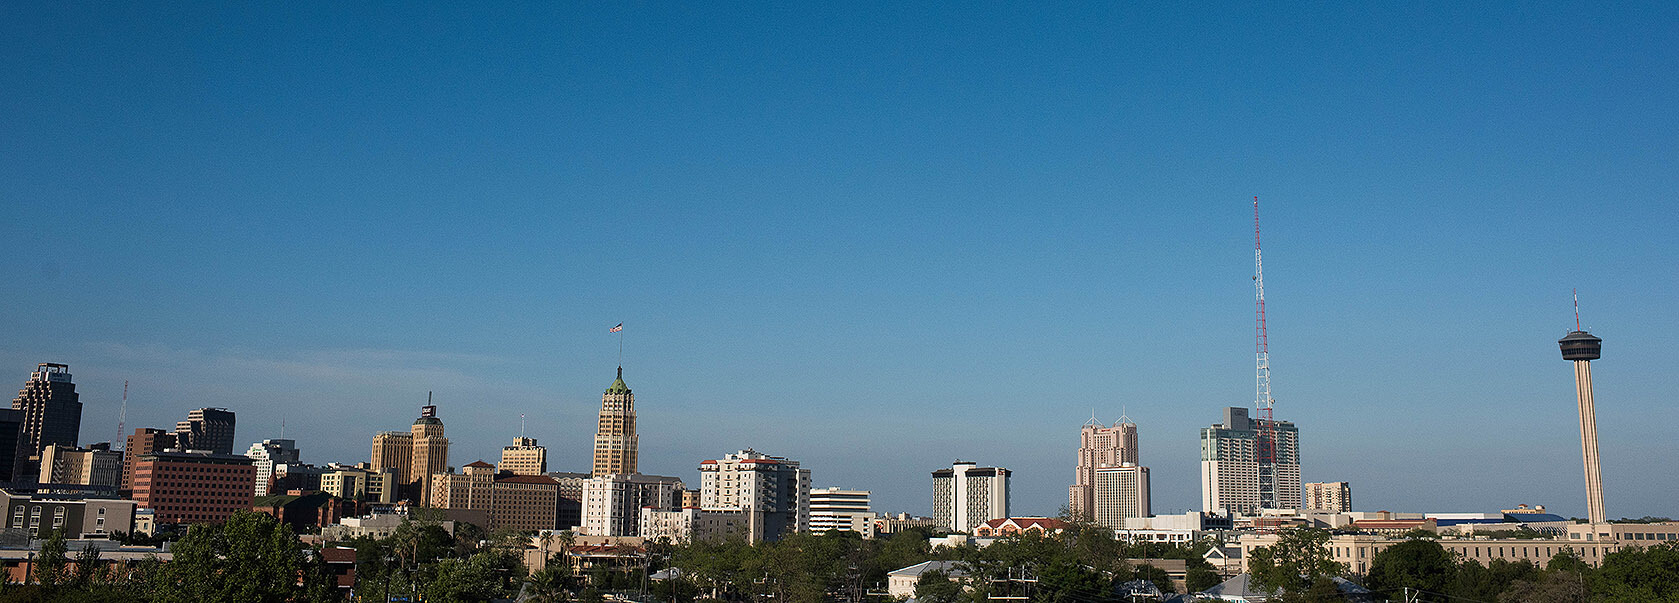 Reflecting on 2017: What it’s been like to report on San Antonio’s inequality